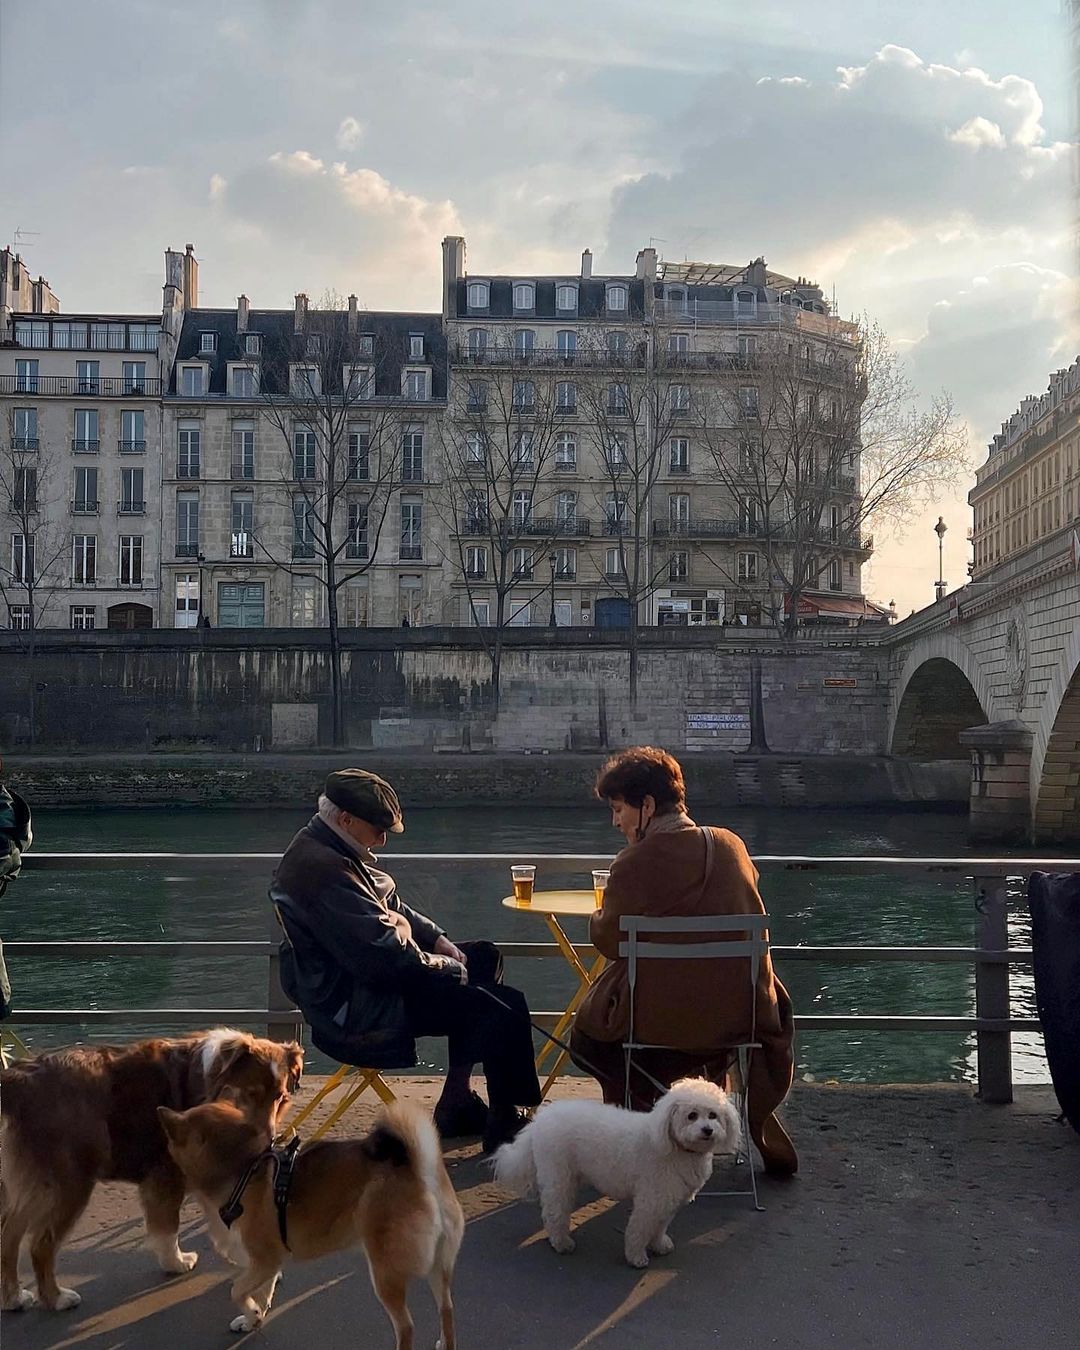 An older couple sharing drinks along the Seine while their pet greets passing dogs